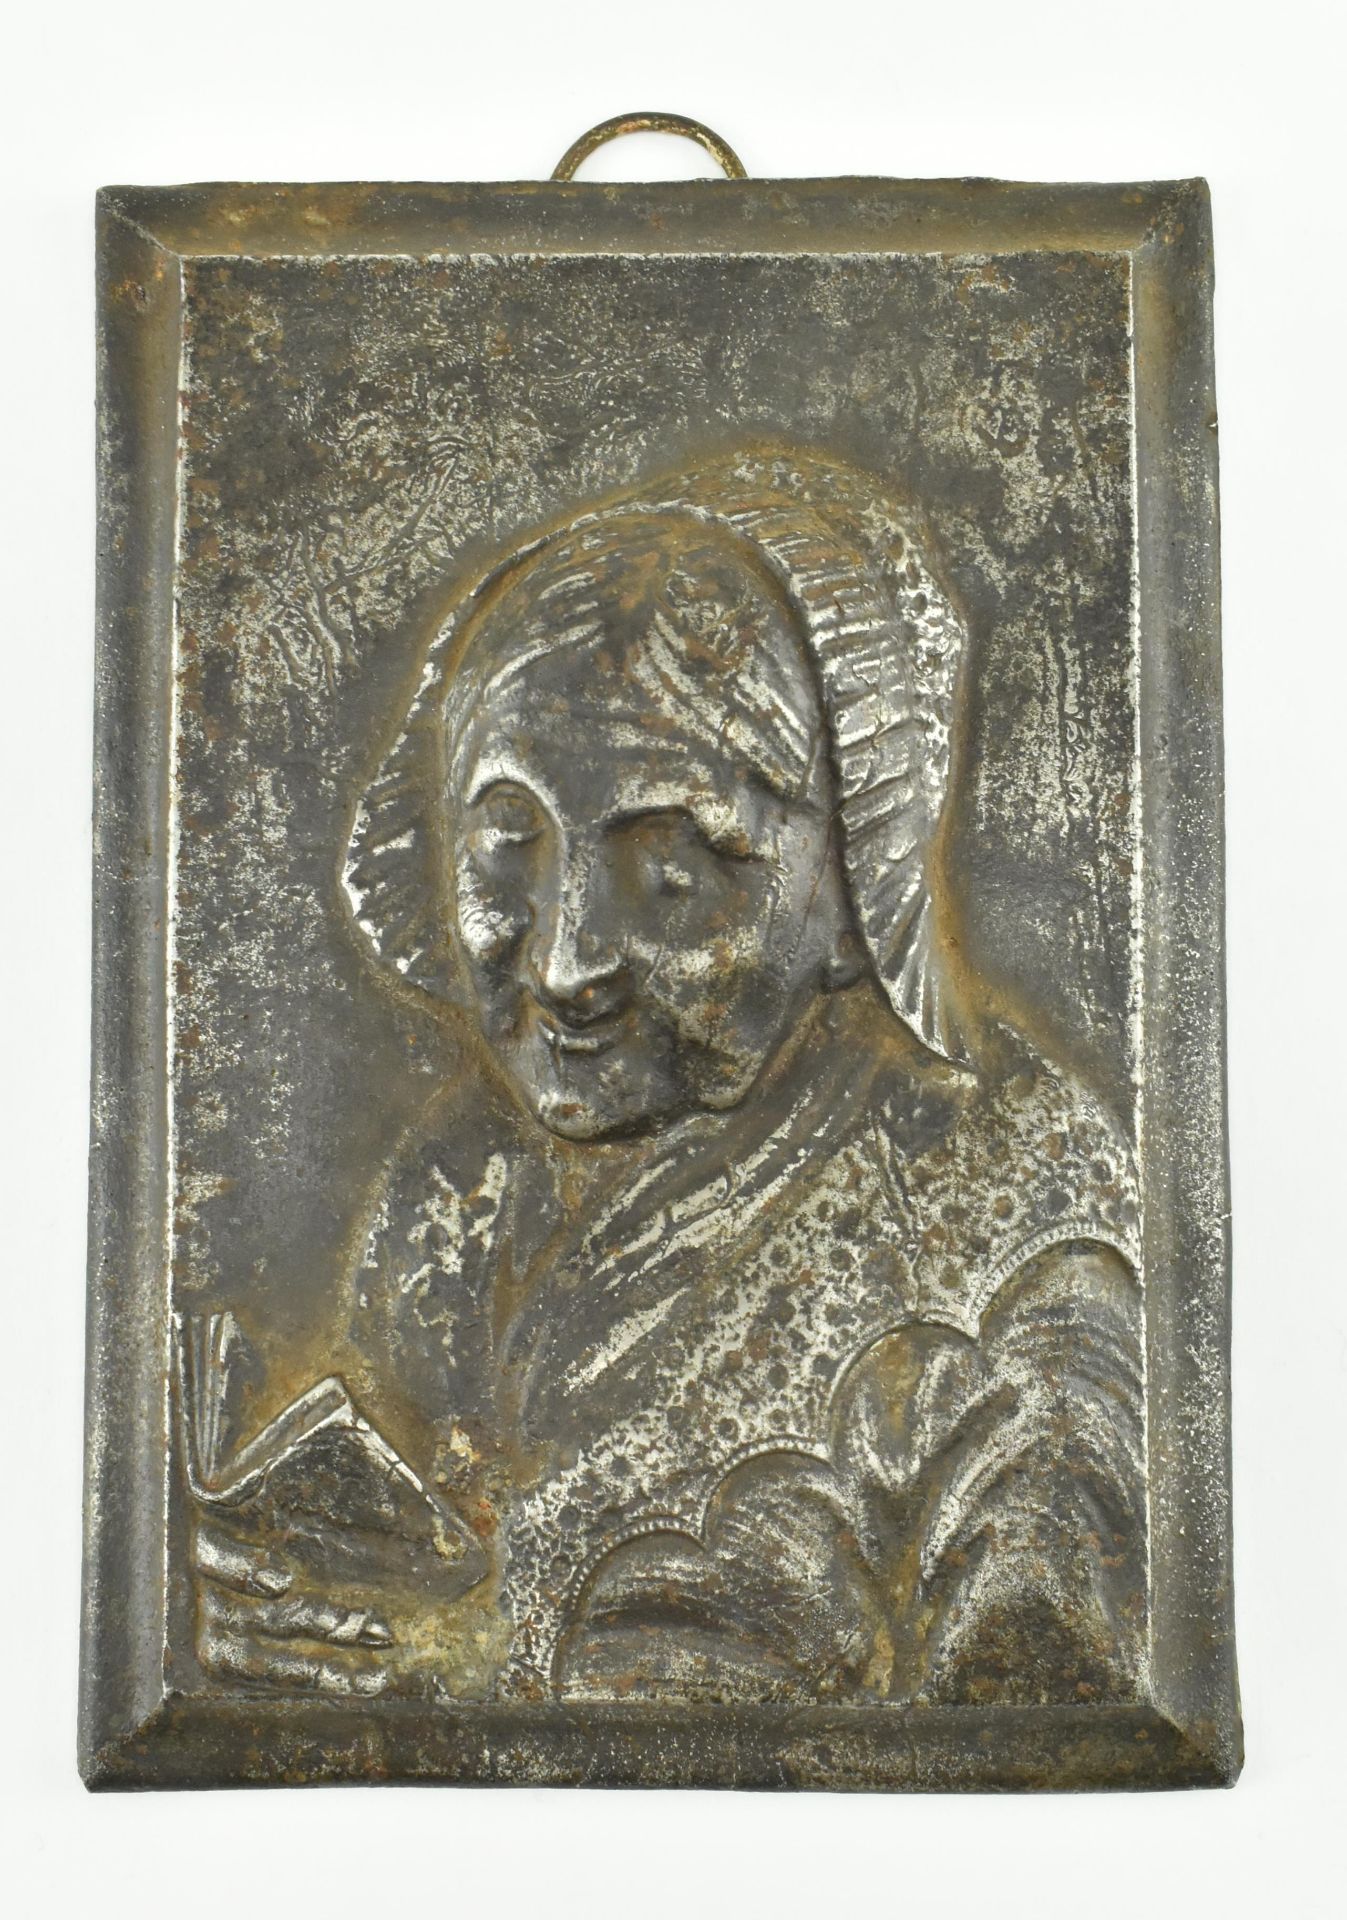 19TH CENTURY BRONZE PLAQUE OF A LADY HOLDING A BOOK